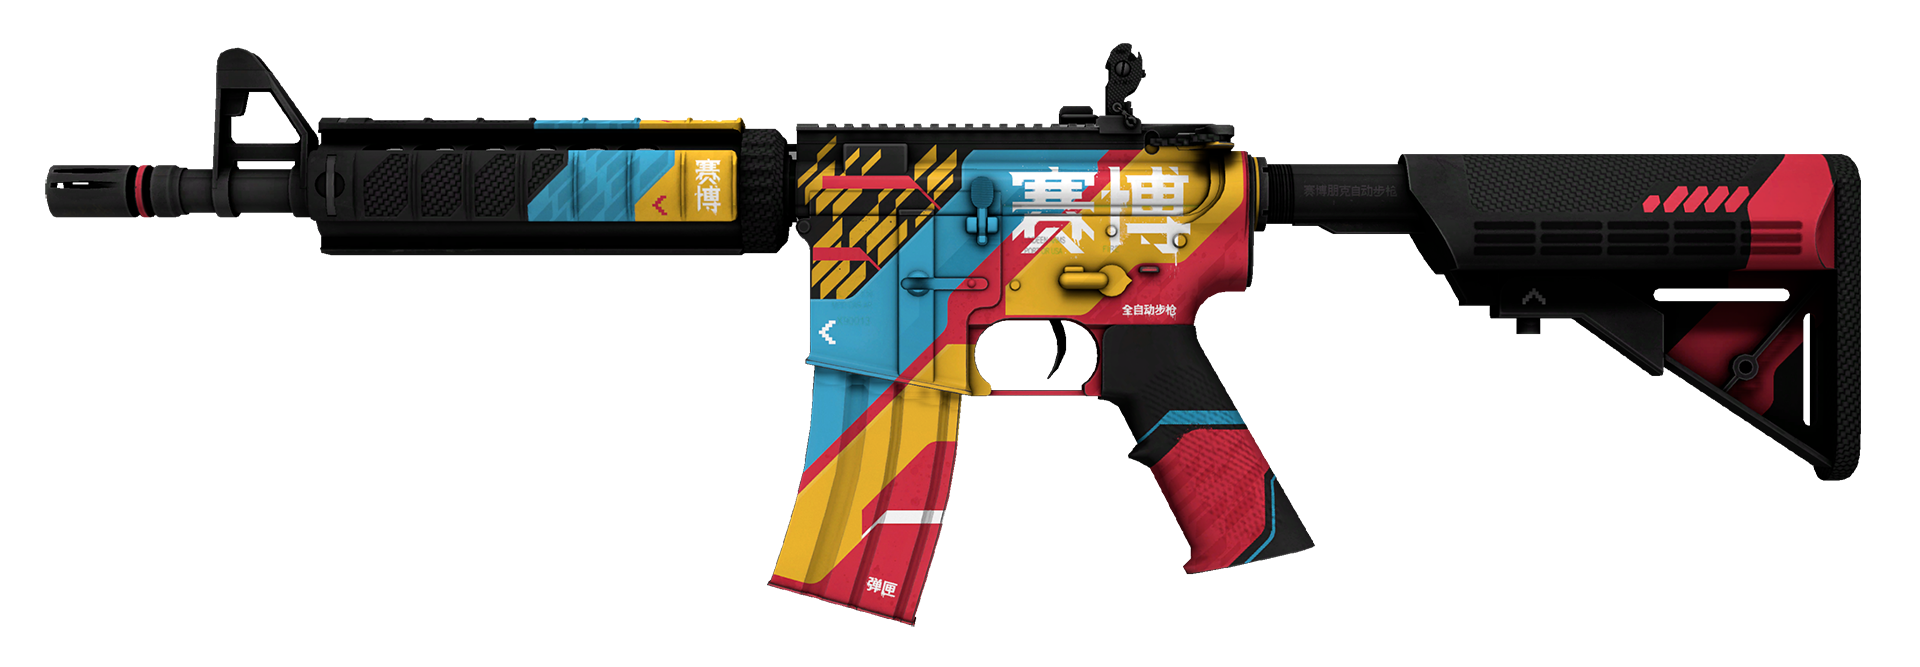 M4A4 Cyber Security Large Rendering